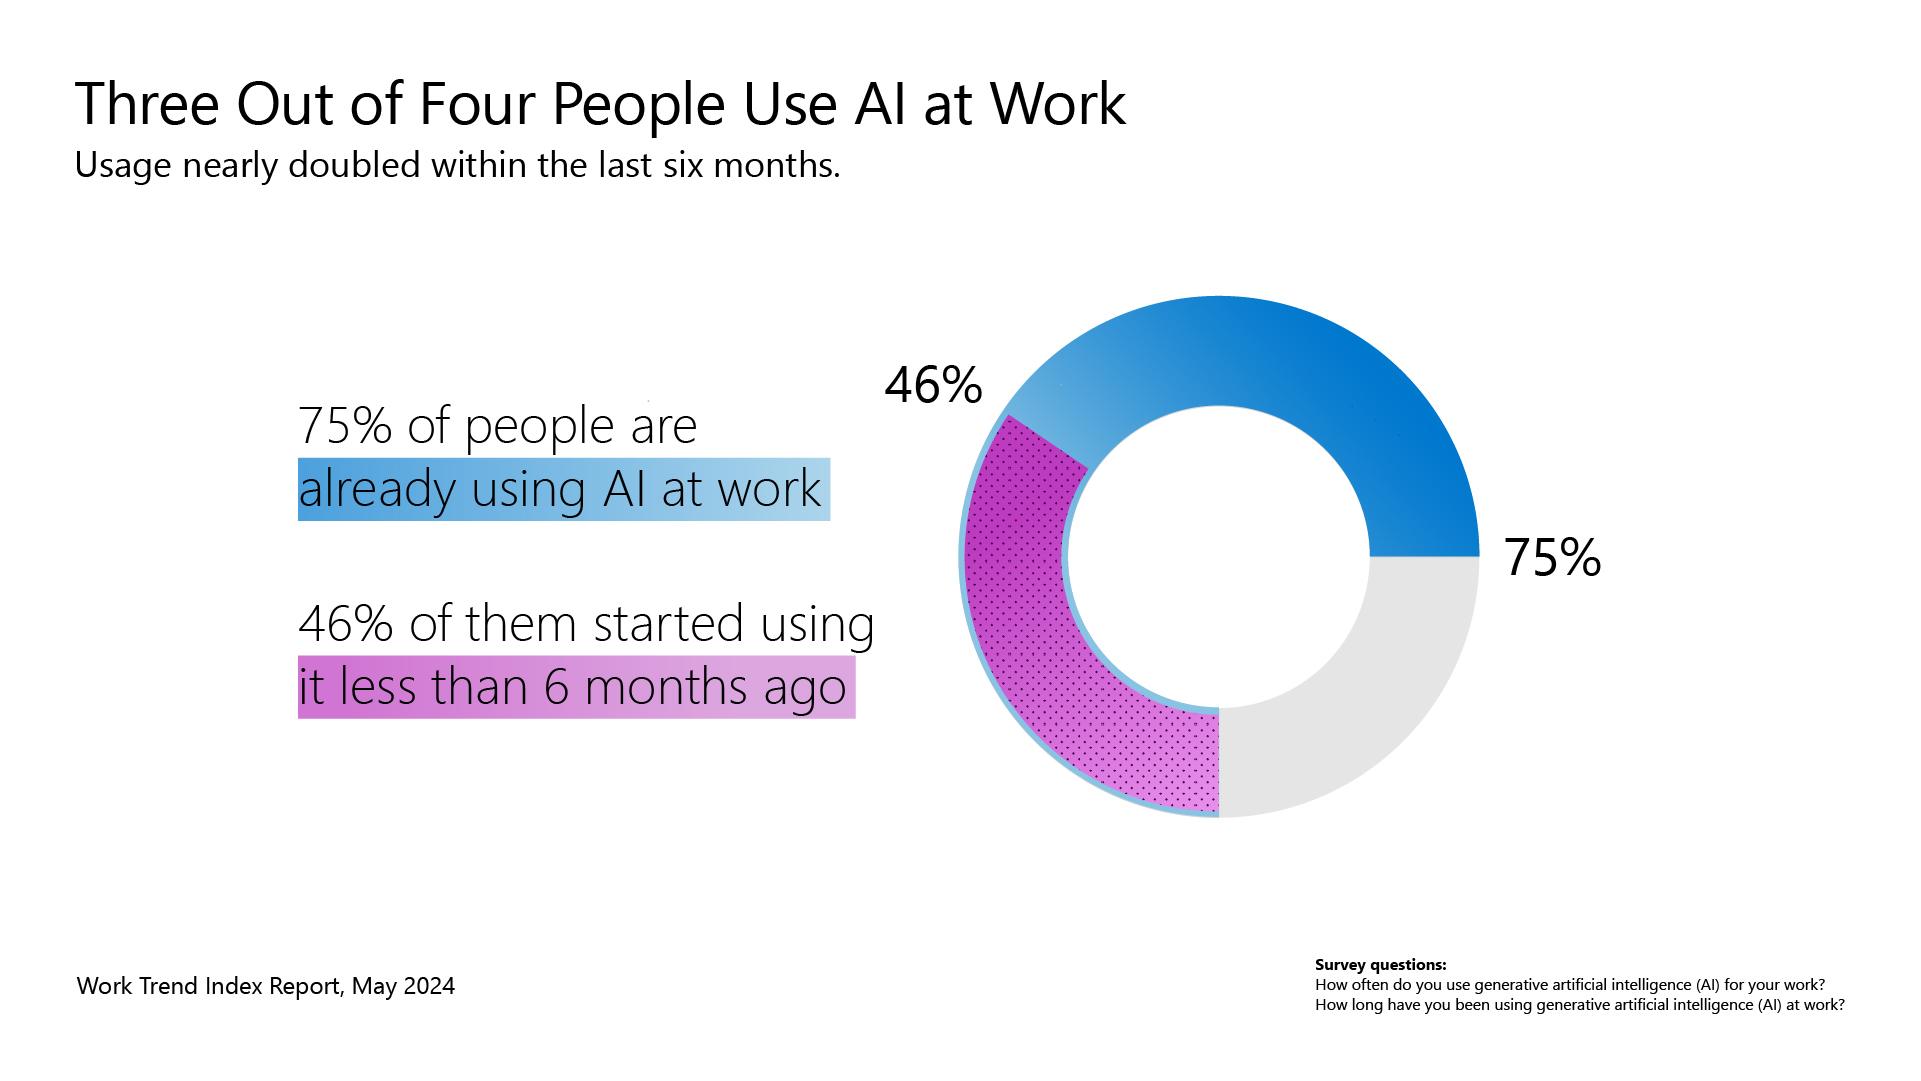 A graphic shows data that finds three out of four people use AI at work